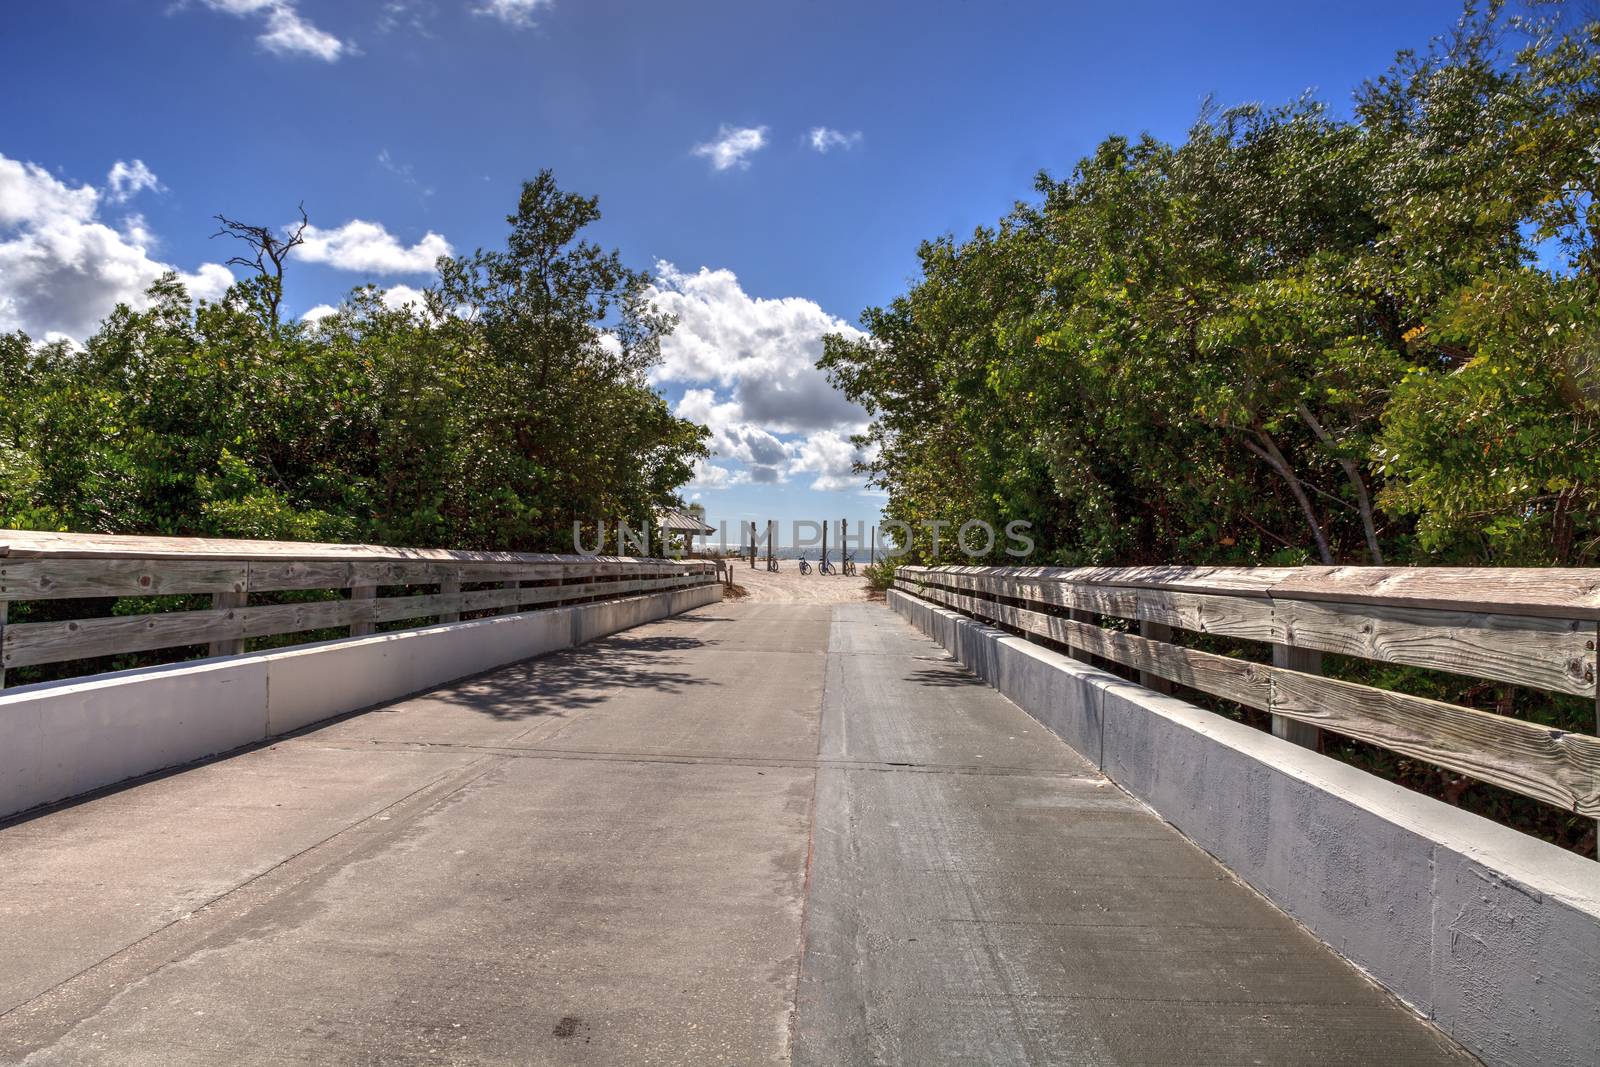 Boardwalk leading to Lovers Key State Park on a sunny day in For by steffstarr